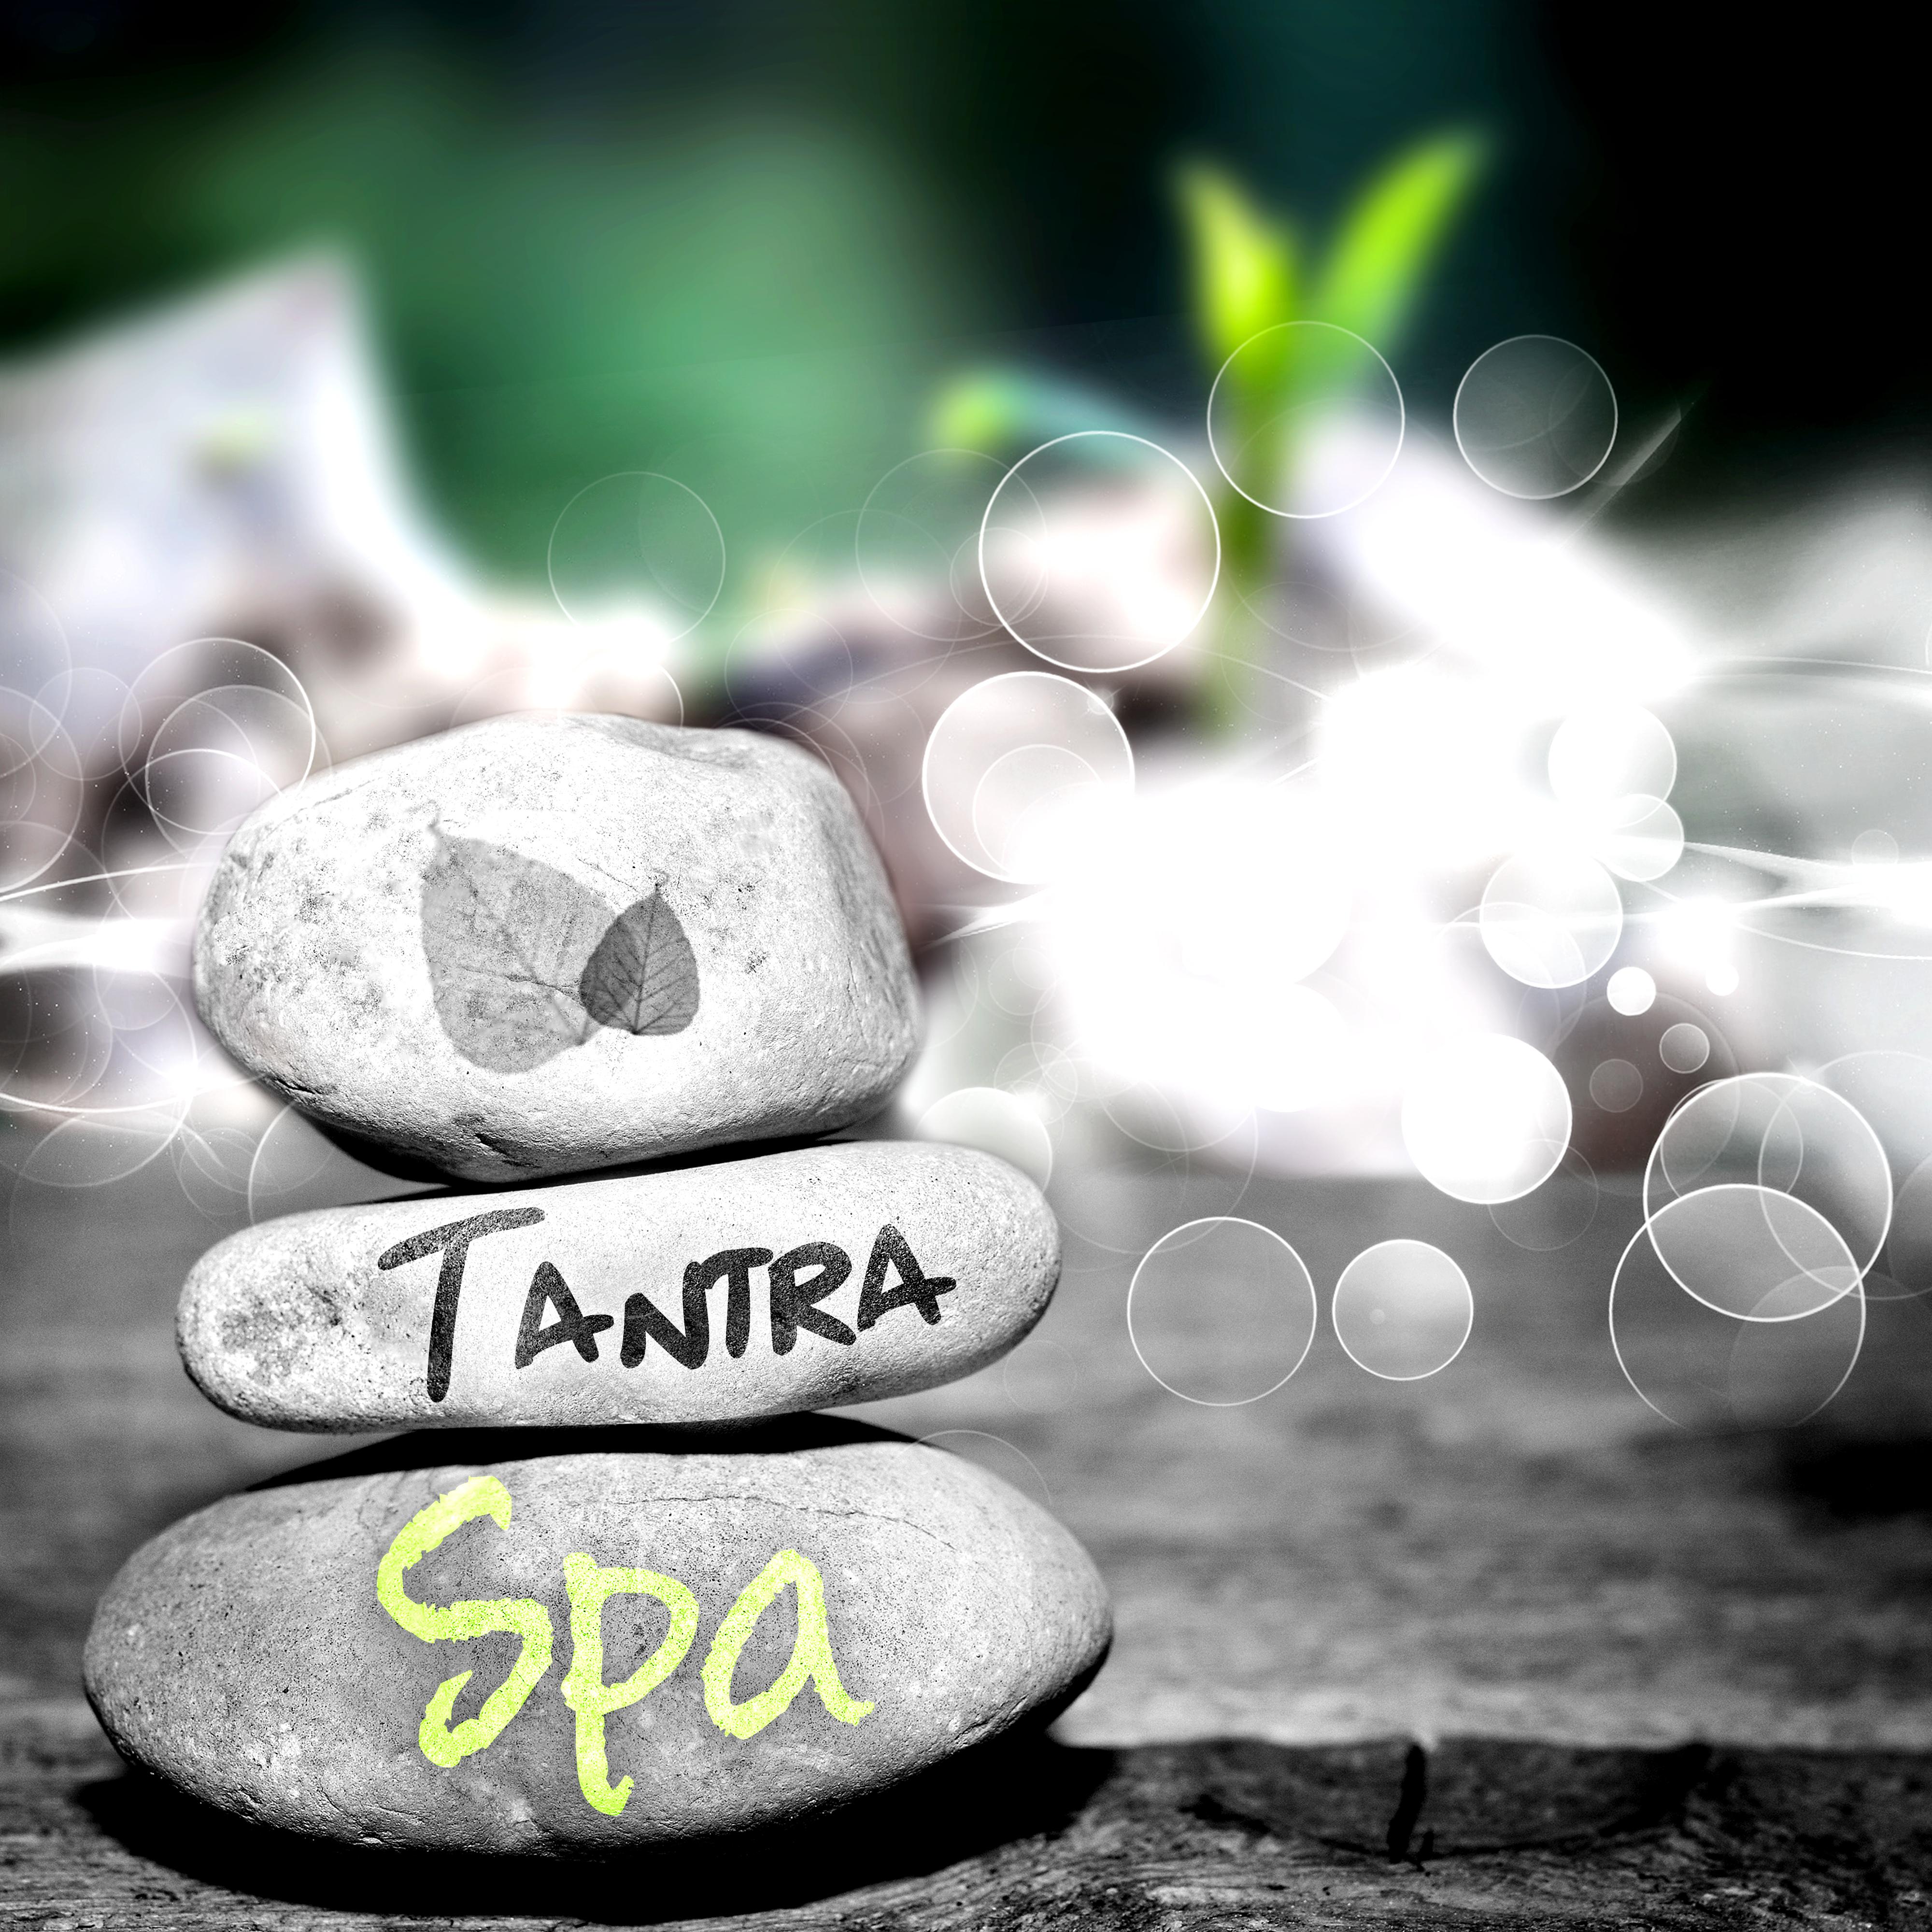 Tantra Spa  Erotic Lounge Massage, Sensual Chill Out Music for Making Love, Kamasutra  Tantric Spa Music